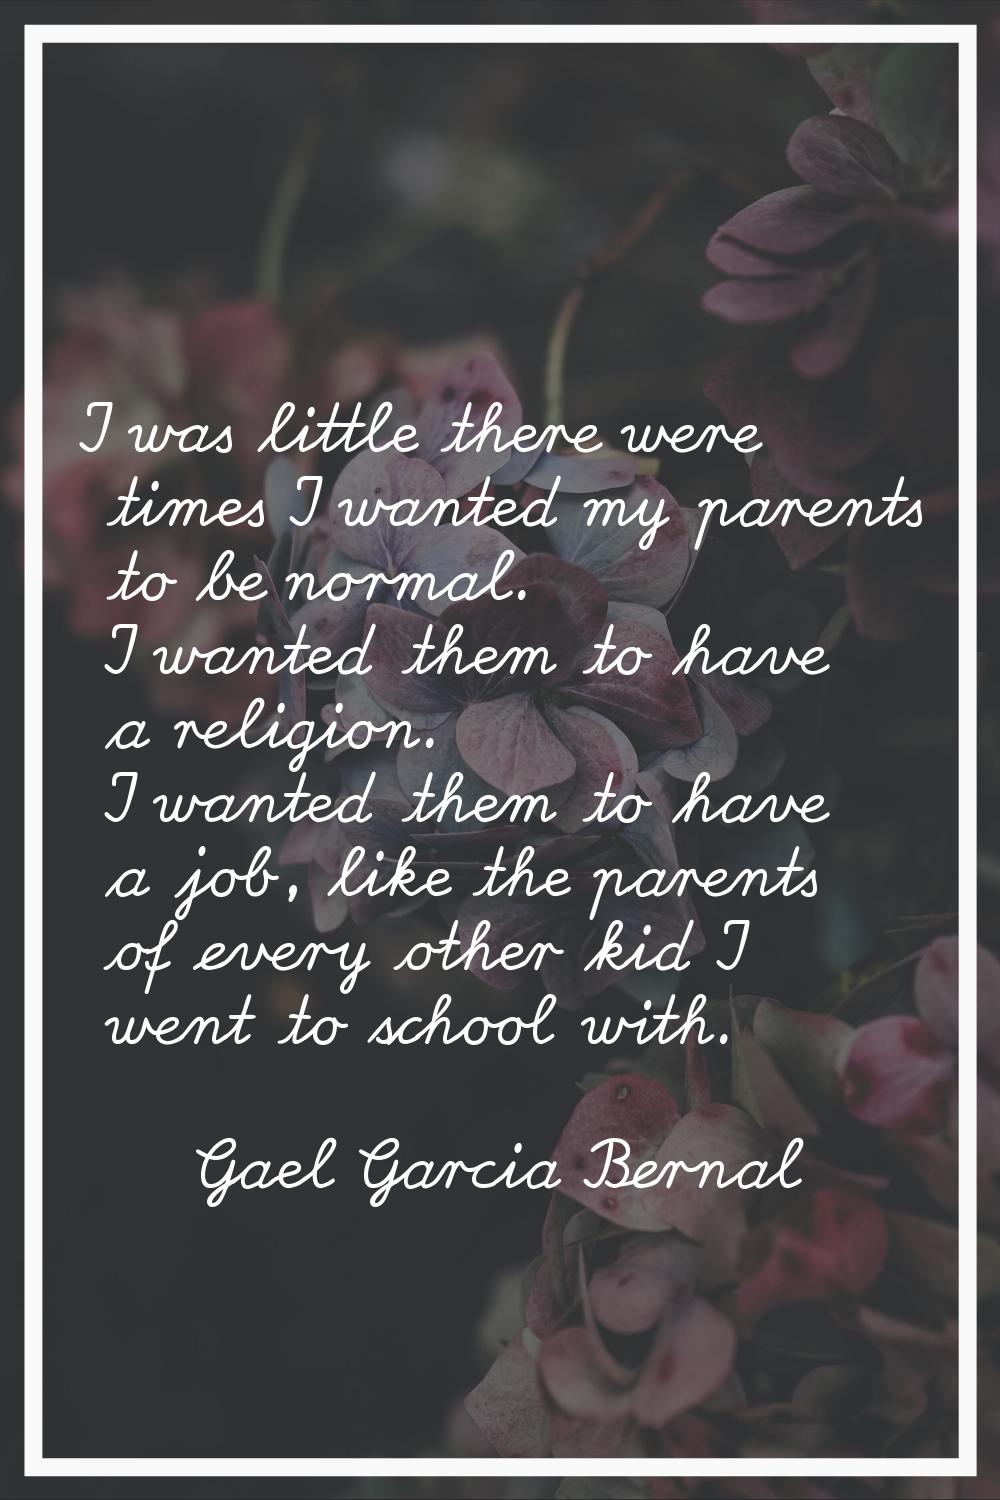 I was little there were times I wanted my parents to be normal. I wanted them to have a religion. I